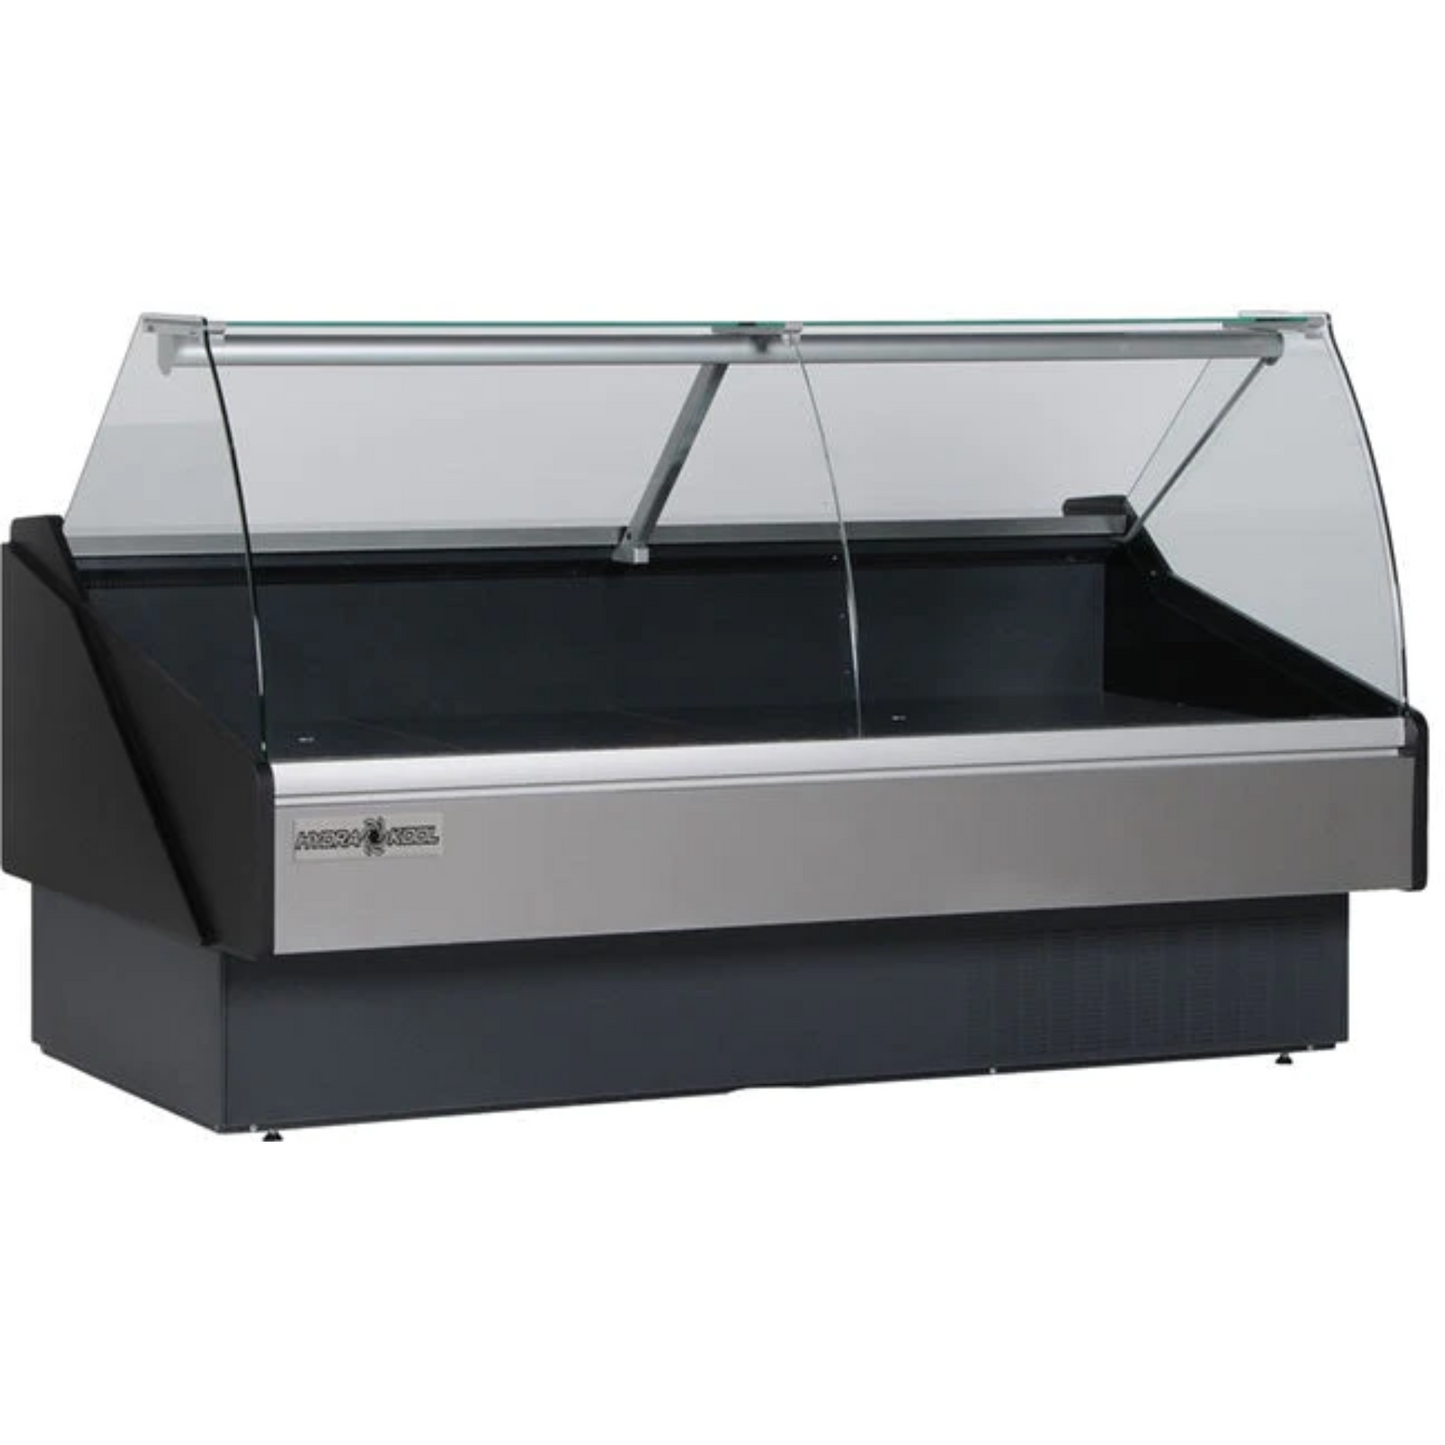 Hydra-Kool KFM-CG-100-S 100" Fresh Meat & Deli Case Curved Glass Self-Contained